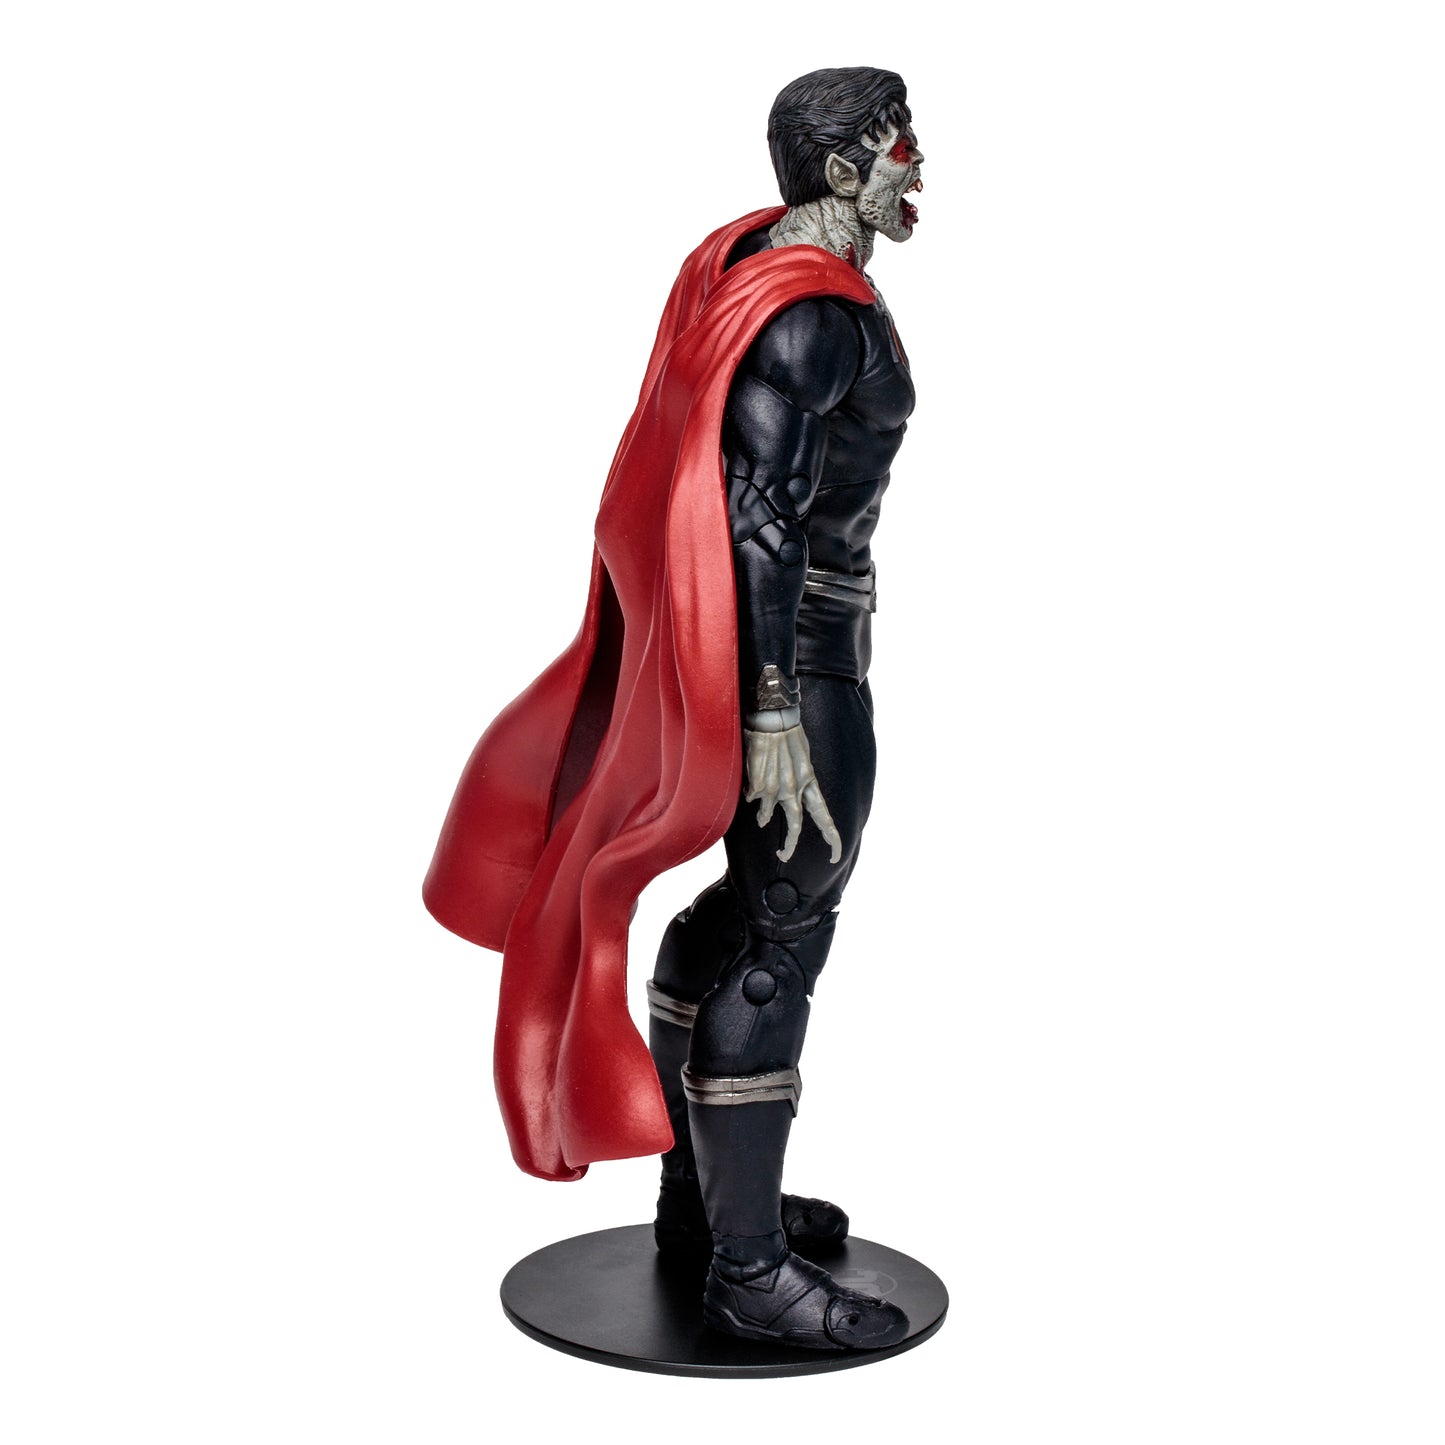 DC Multiverse Vampire Superman (DC vs.Vampires) Gold Label 7-Inch Action Figure right pose - Heretoserveyou